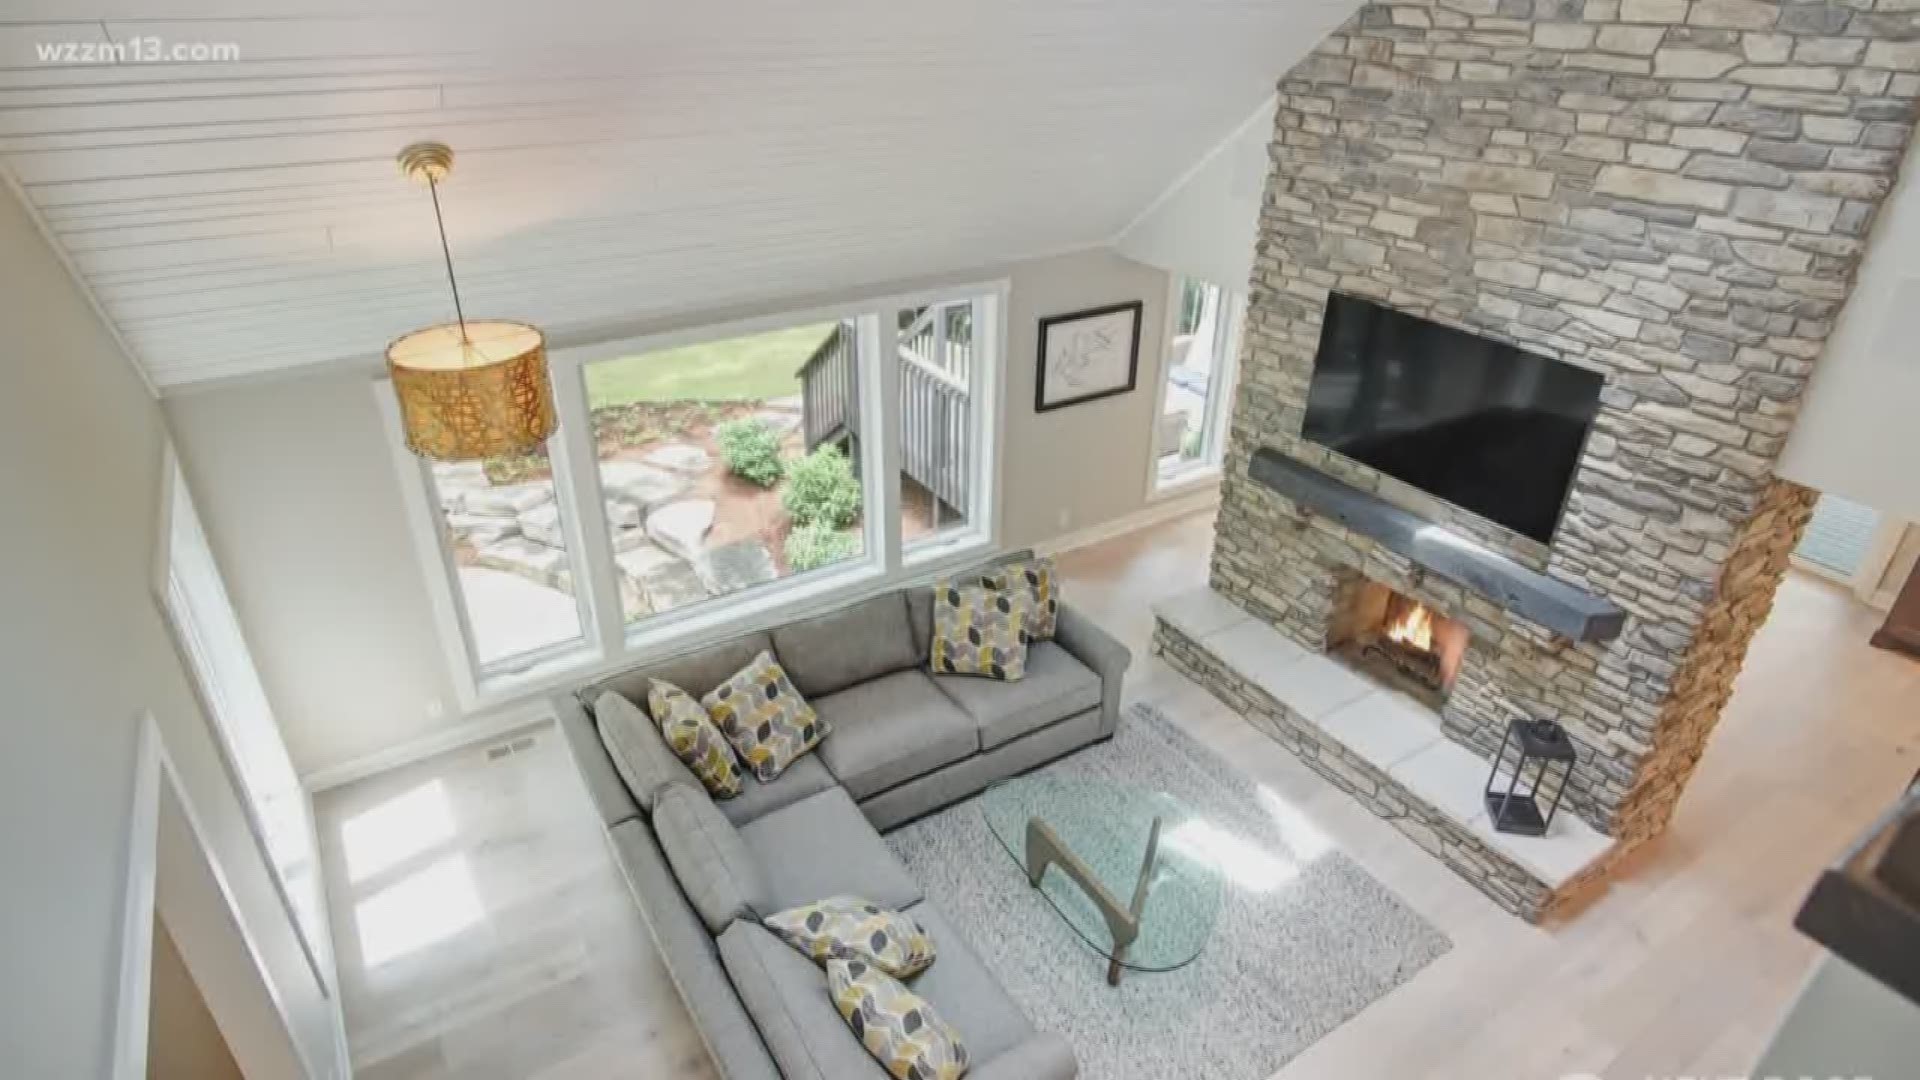 The Lakeshore Parade of Homes is an exclusive showcase of new and remodeled homes along the lakeshore of West Michigan, presented by the Lakeshore Home Builders Association.